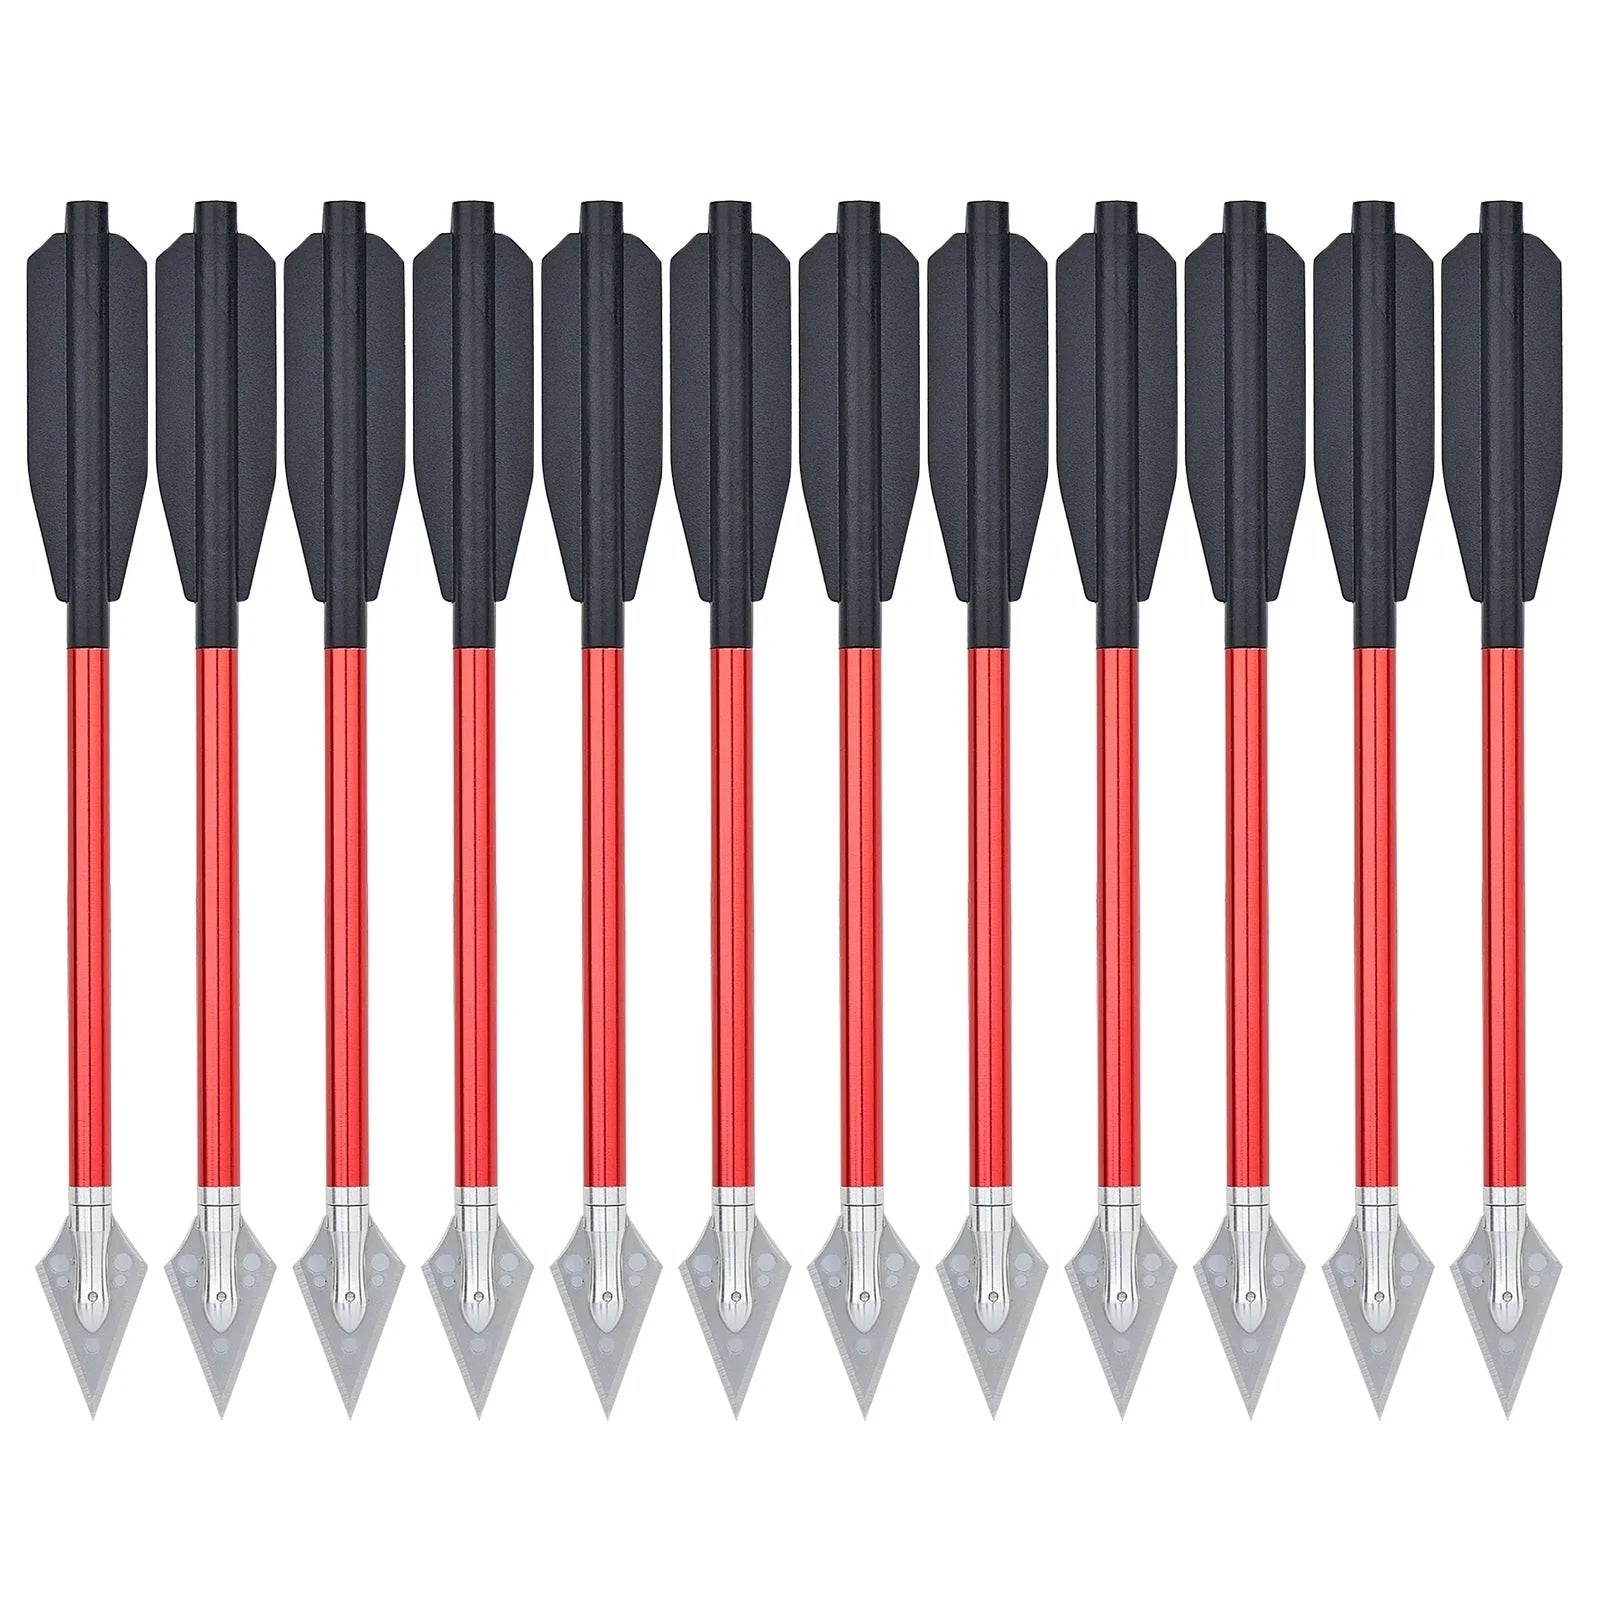  Aluminium Crossbow Bolts Arrows 6.5 Steel Broadhead Tips  Hunting Arrows for 50-80lbs Mini Crossbow Archery Pistol - Fishing Hunting  Target Practice (Pack of 3) : Sports & Outdoors